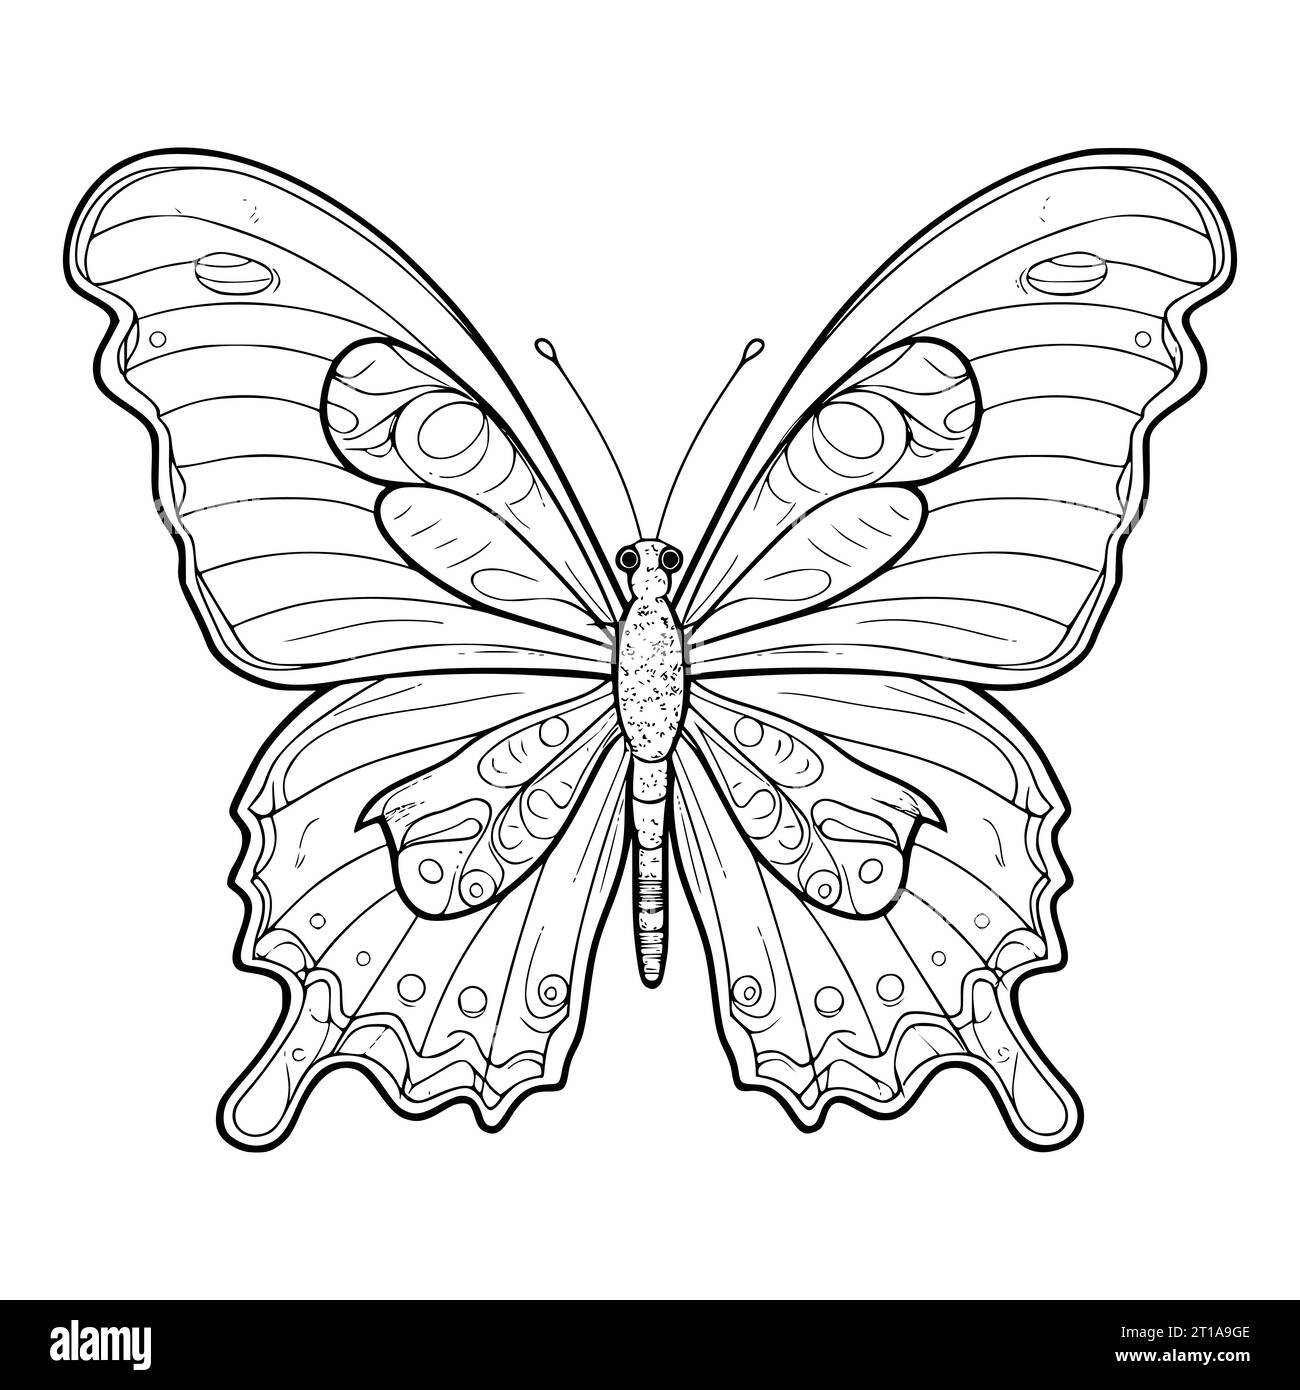 Butterfly Coloring Page for Kids Stock Vector